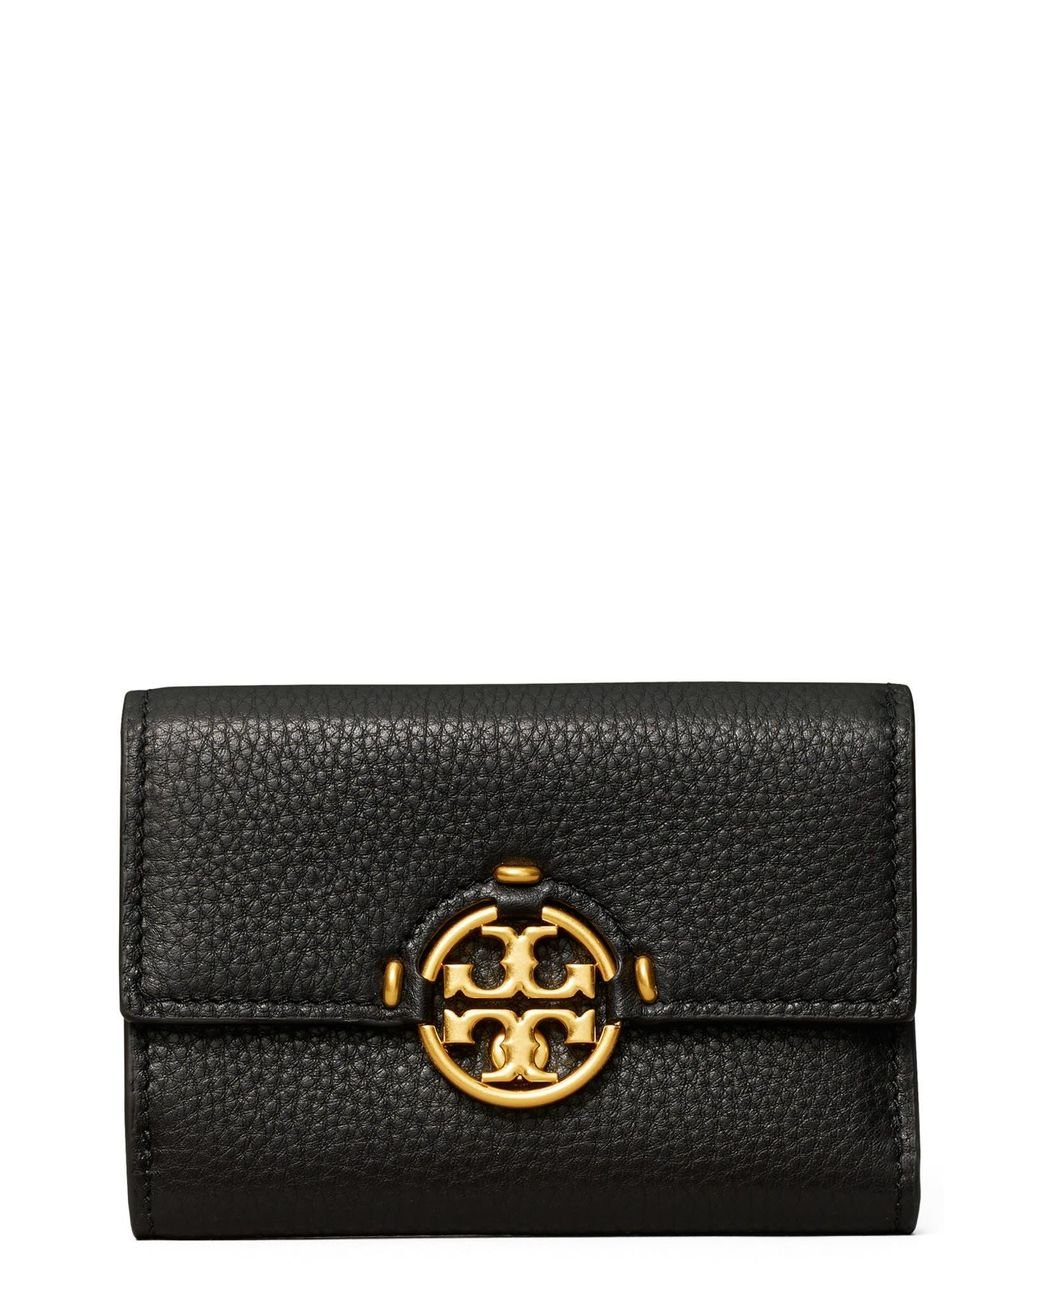 Tory Burch Miller Medium Trifold Leather Wallet in Black - Lyst